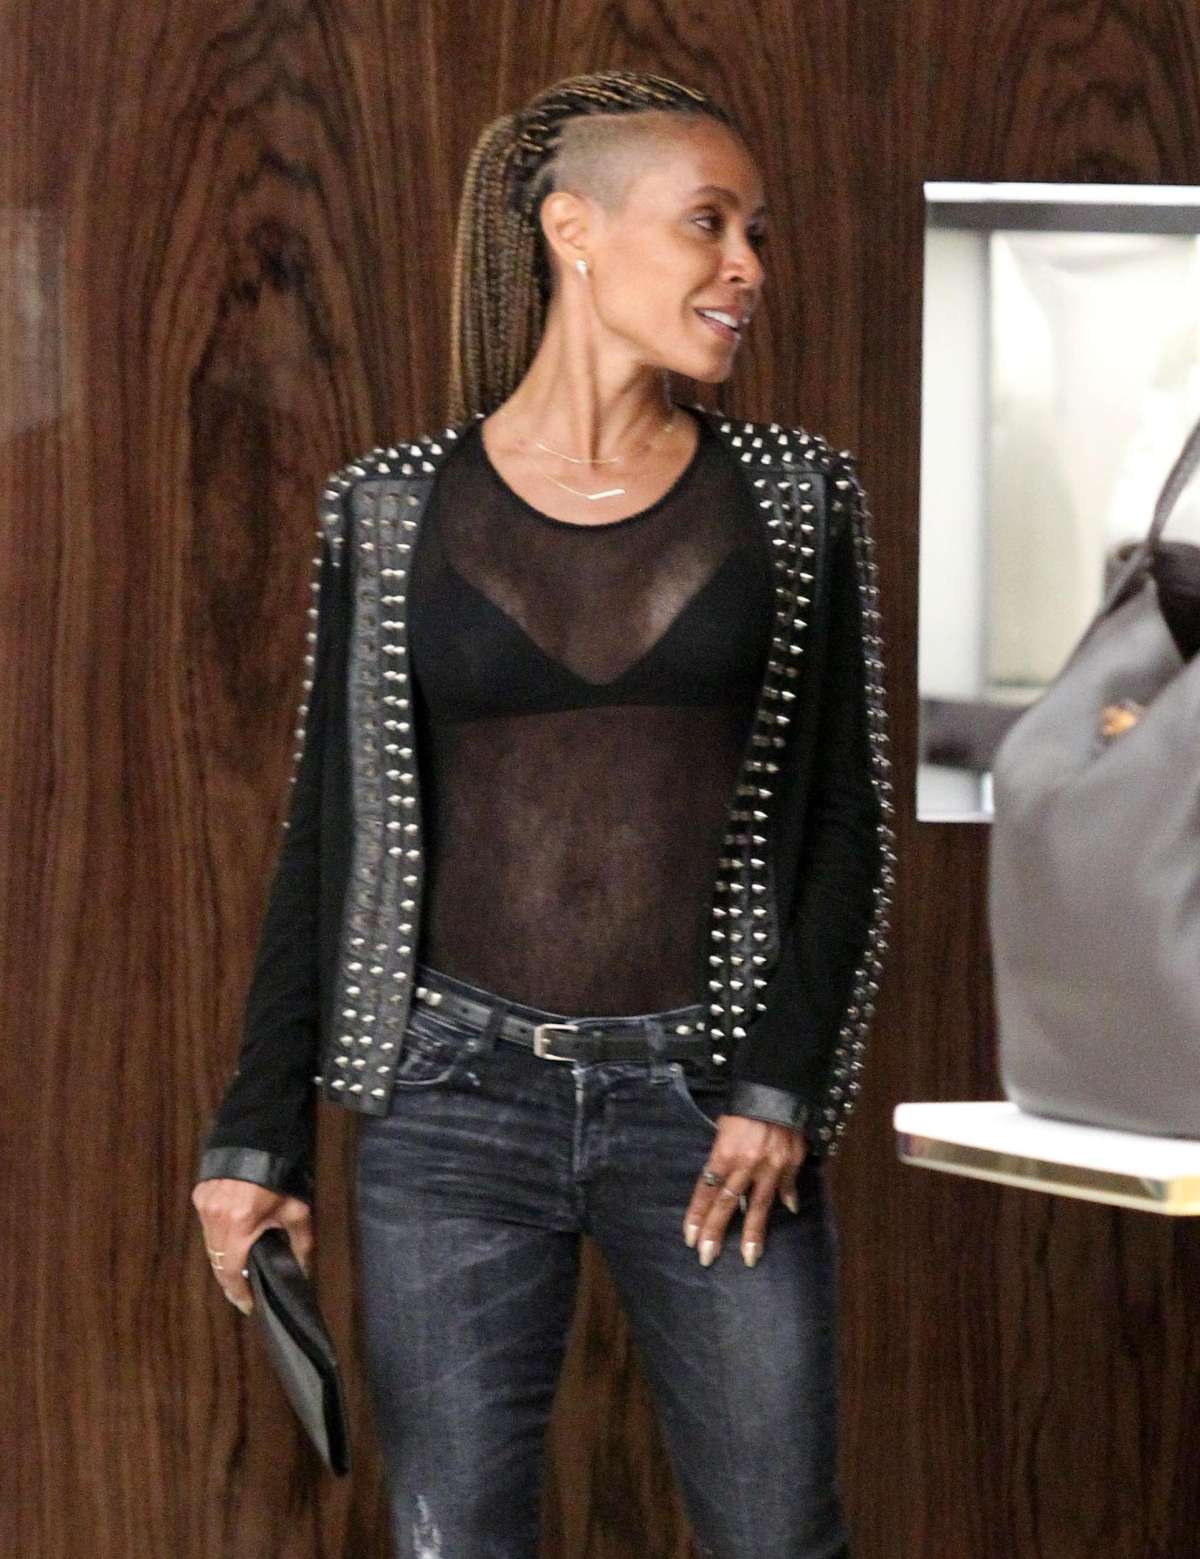 22 Hot Pictures Of Jada Pinkett Smith The Urban Daily